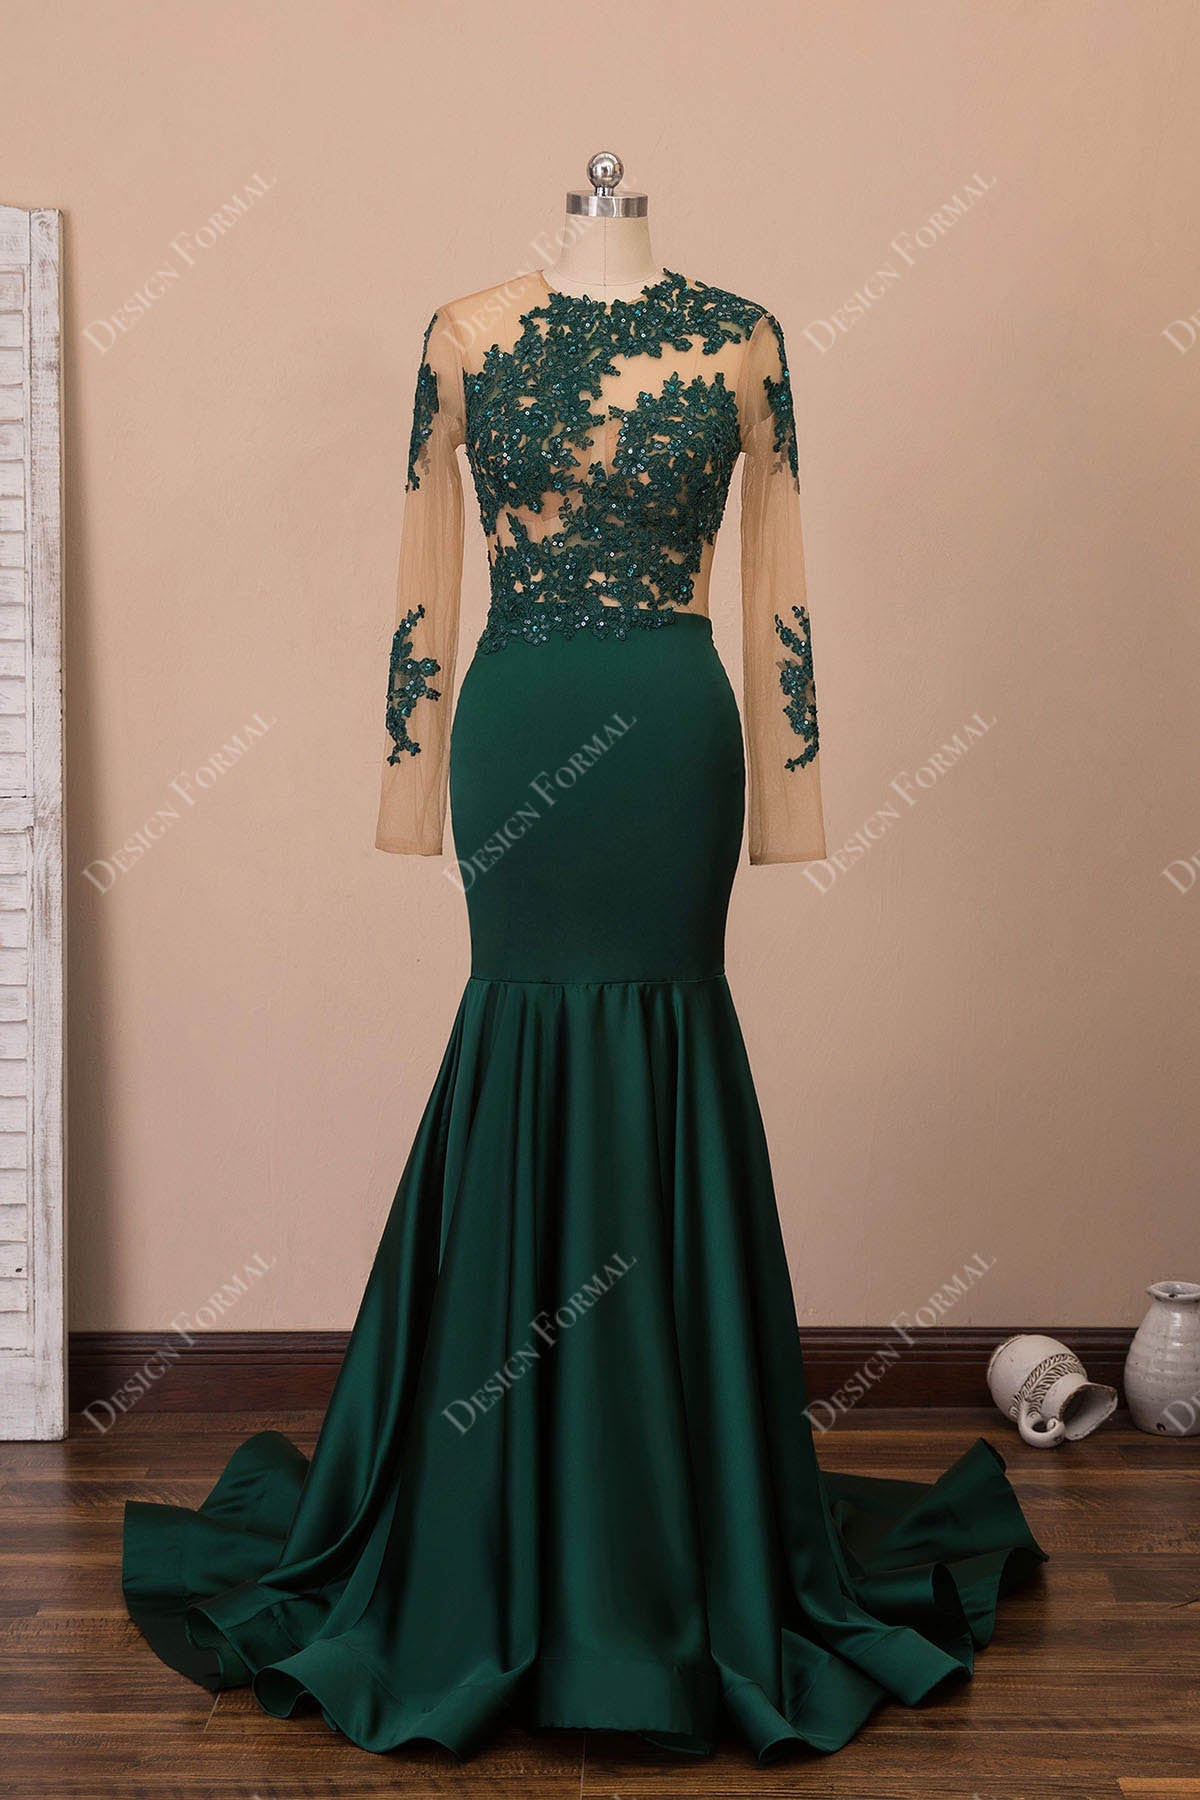 emerald sequin lace illusion jersey prom dress